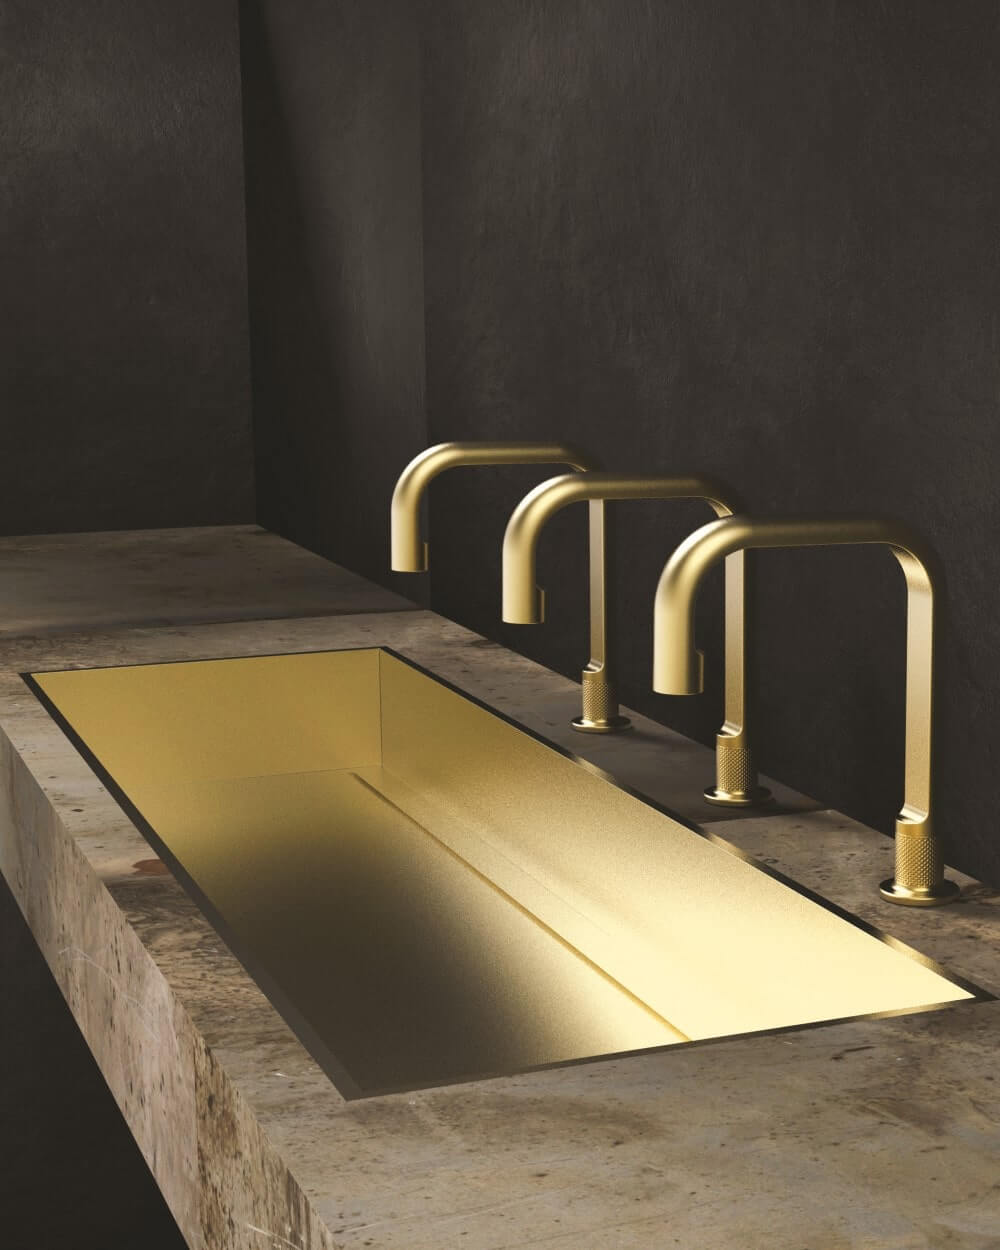 View the iconic designs of Gessi bathroom furniture.